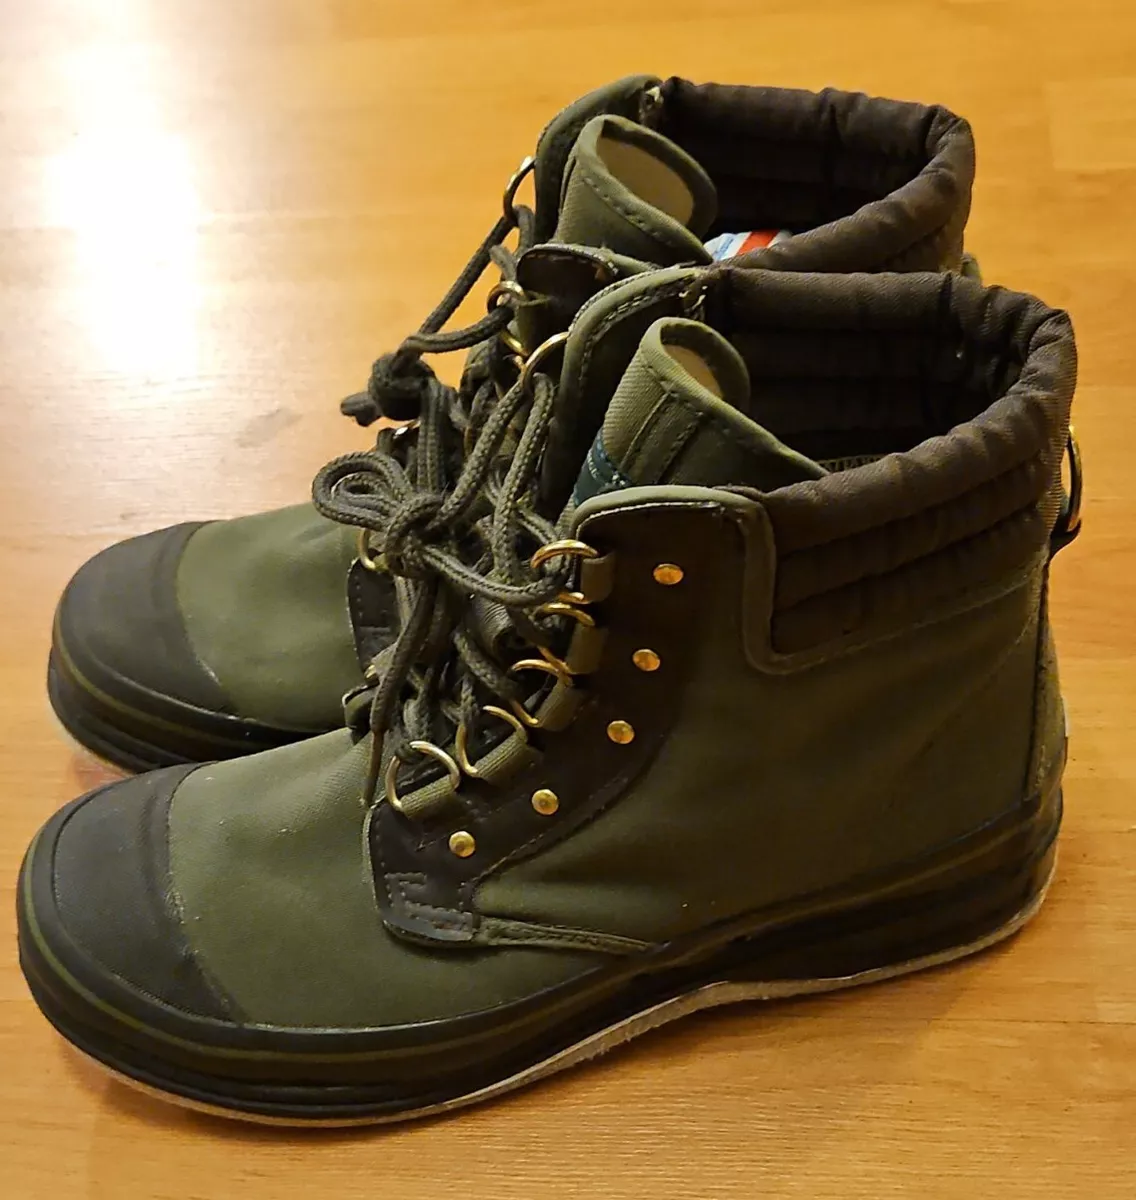 Orvis Fishing Felt Soled River Wading Boots Mens Size 8 Green